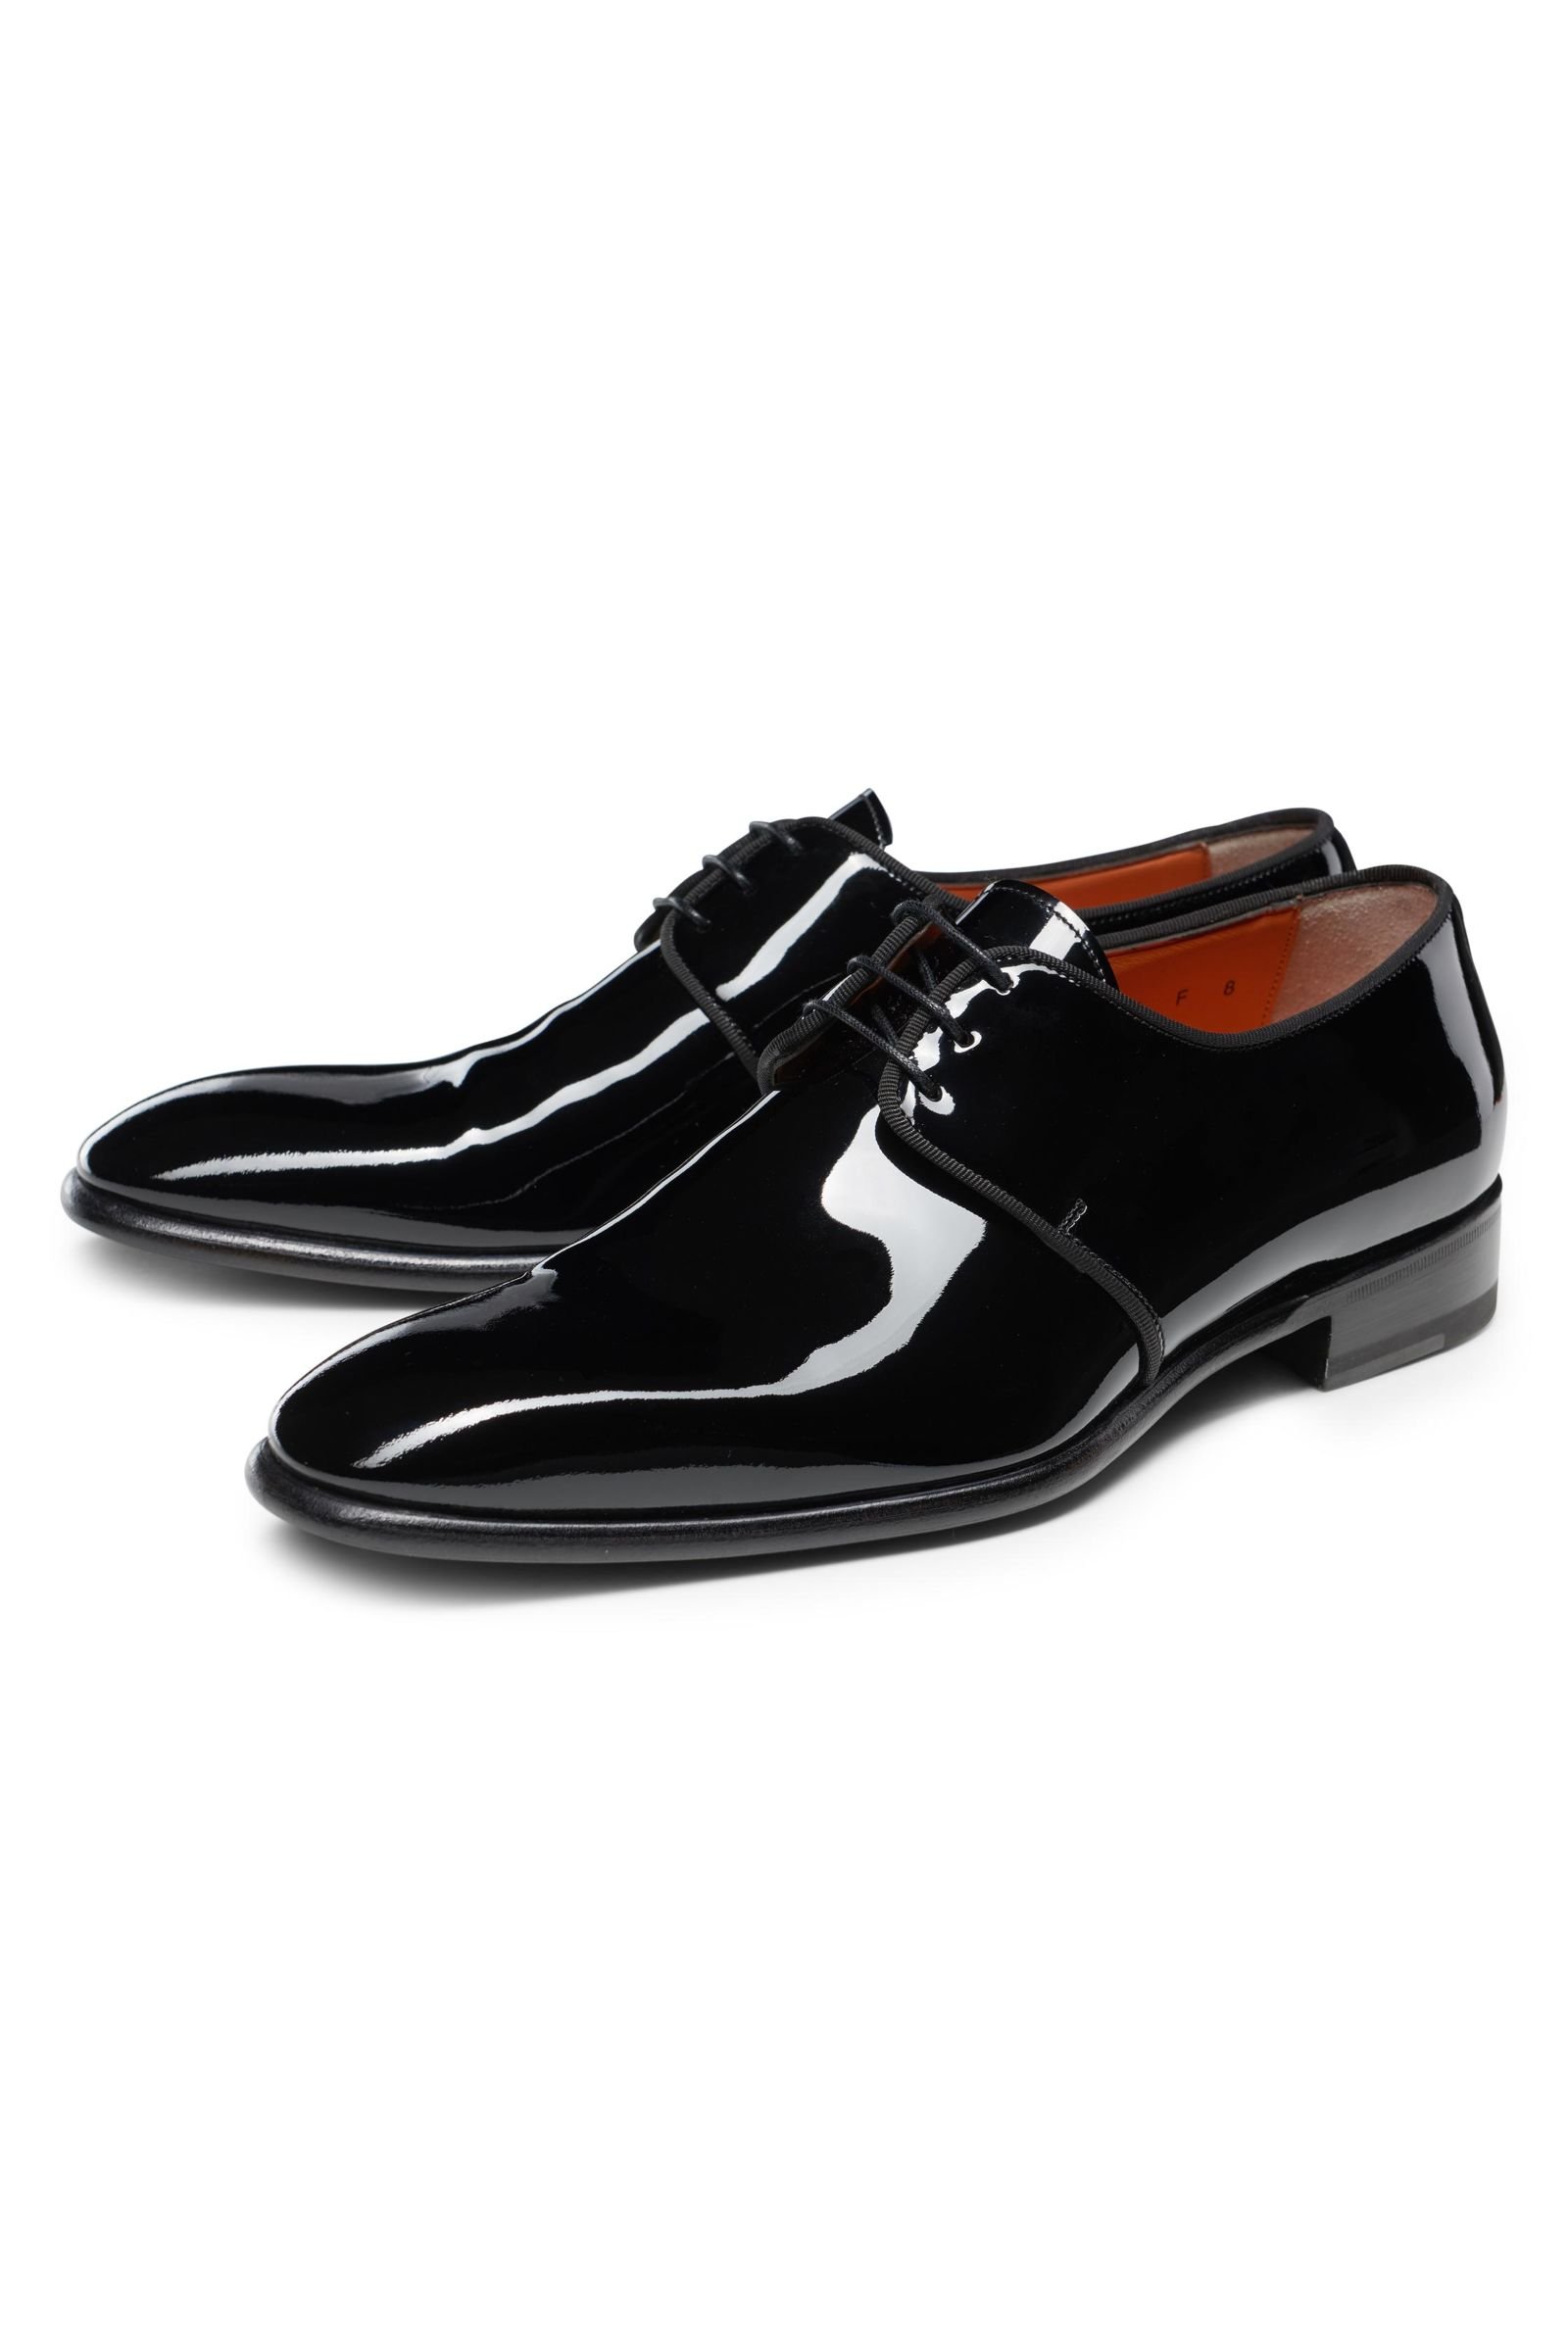 Patent leather Derby shoes black